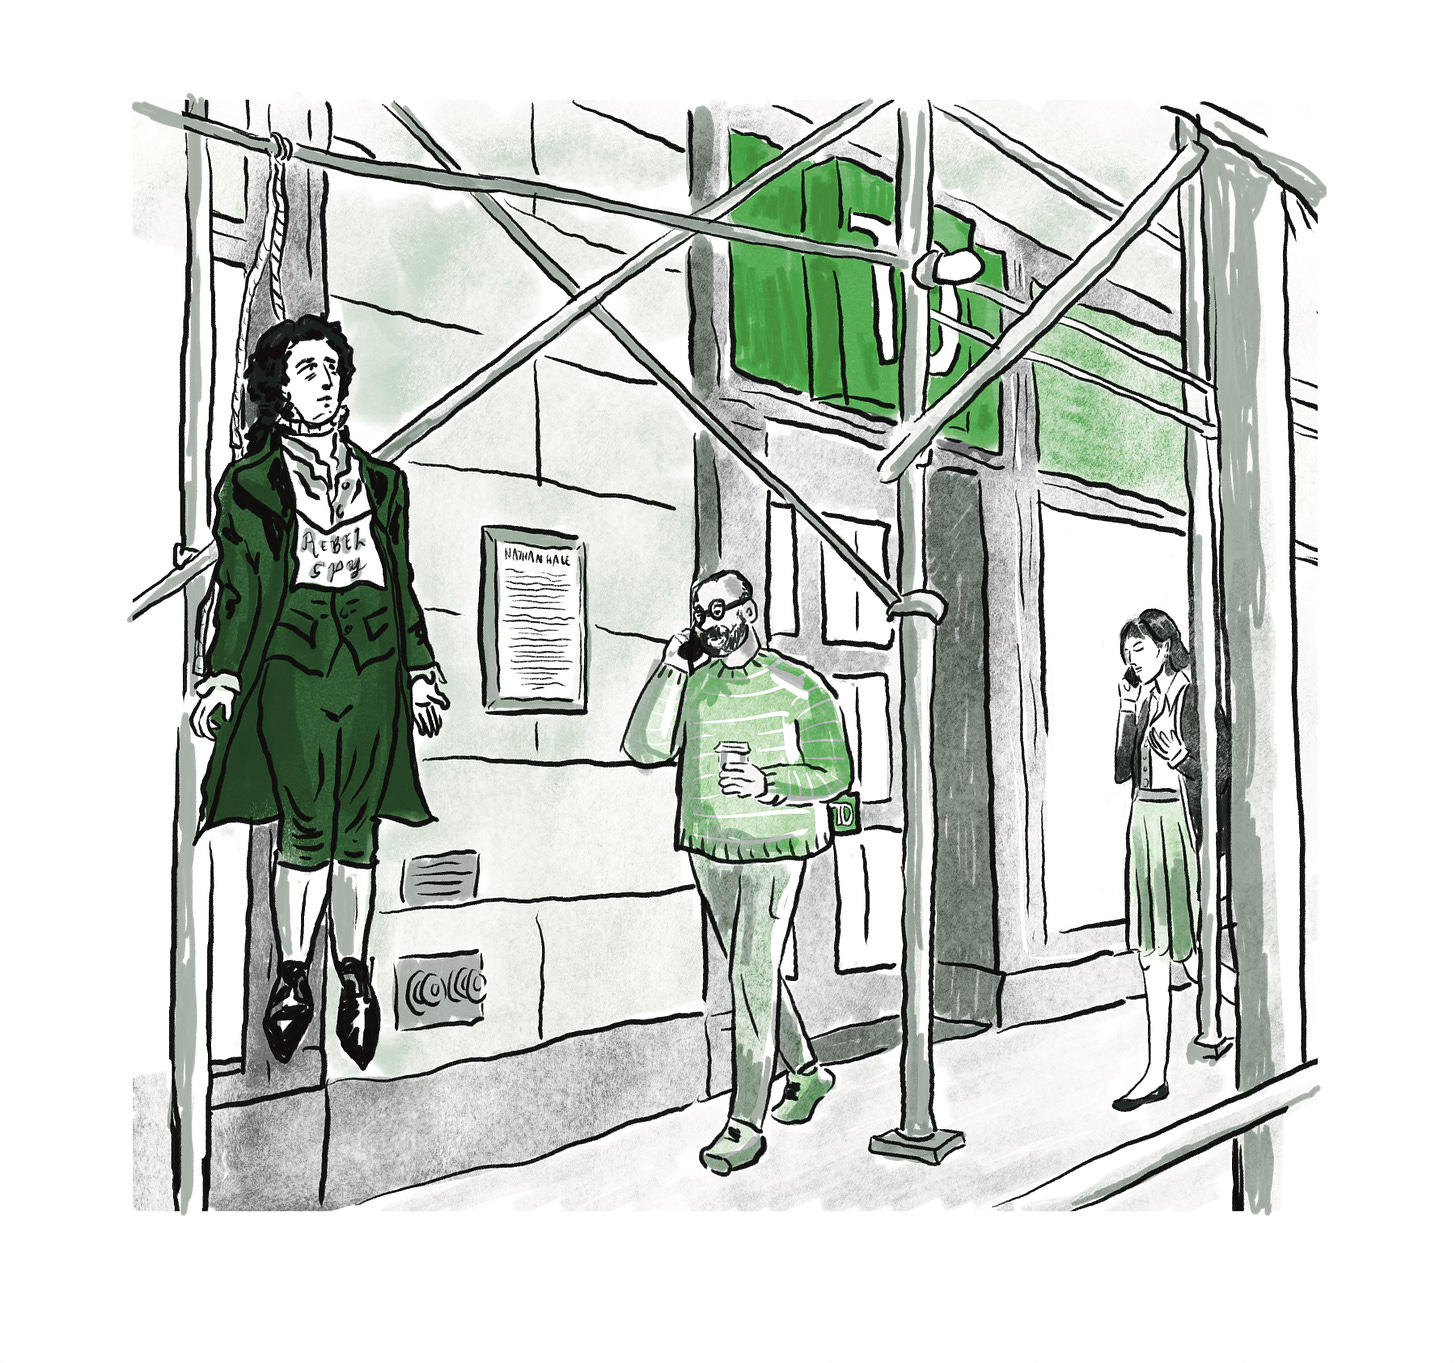 A comic drawn by Emily Zilber of Nathan Hale hanging from the scaffolding outside the TD Bank as it looks today. He looks upwards as he appears in the City Hall Park statue. He wears a green suit and is marked Rebel Spy. Two New Yorkers pass by, not seeing him, each on their cellphone. A man in glasses in a green sweater holding a coffee  passes the memorial plaque. A woman is a green pleated skirt is a few feet behind him. The TD Bank sign is vibrant green. The rest of the scene is rendered in black and white. 